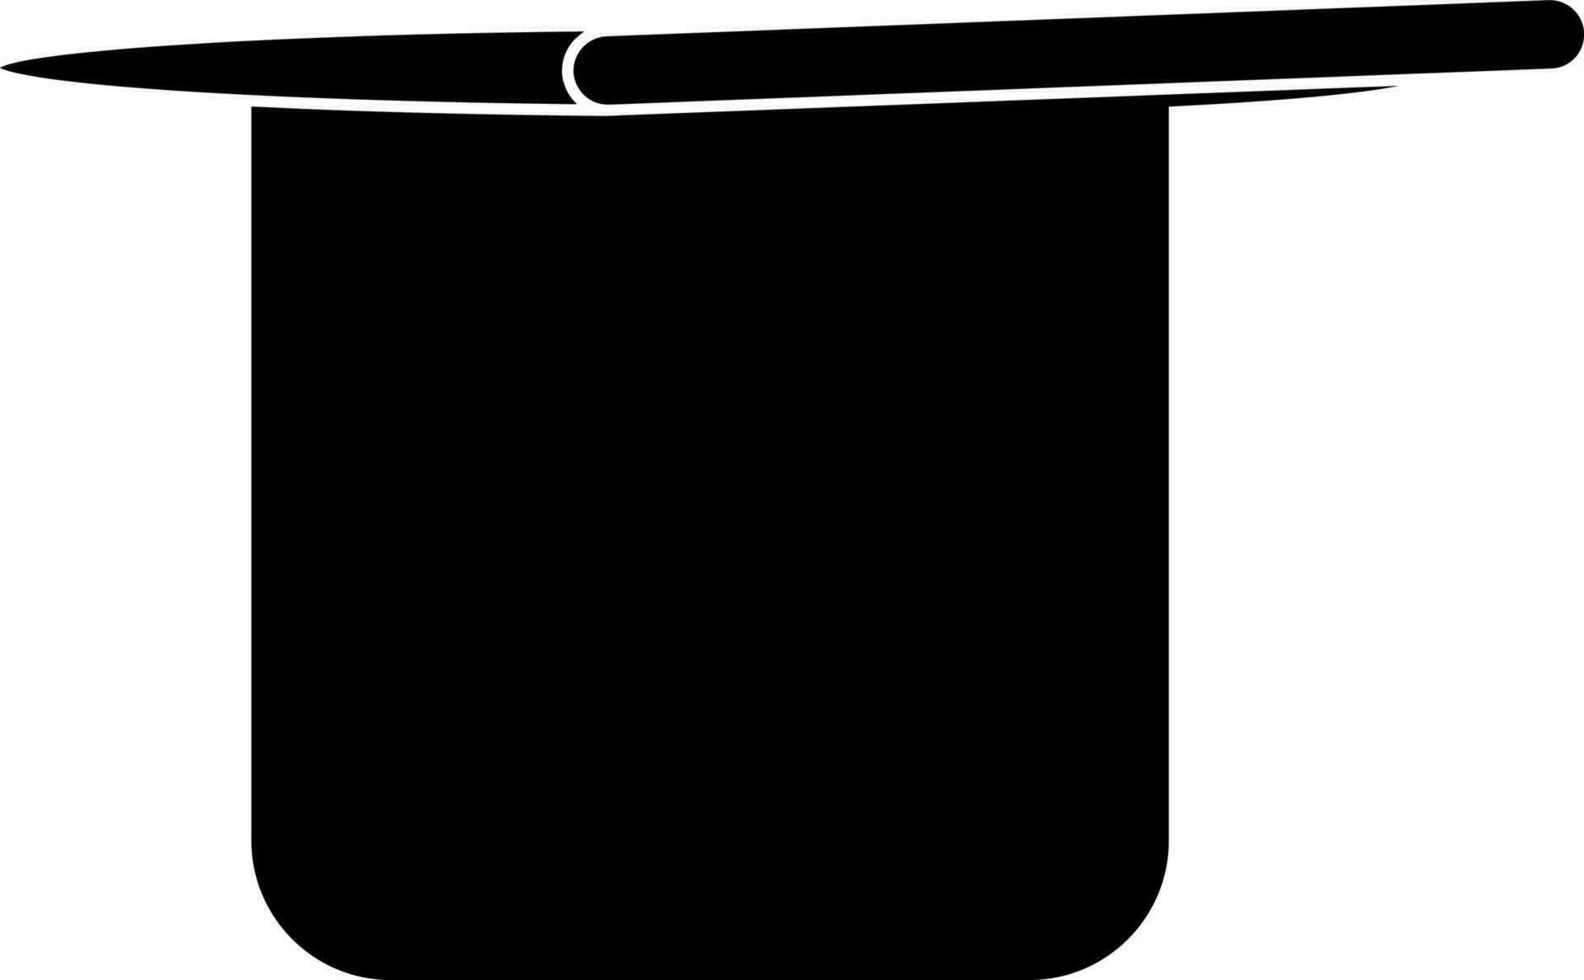 Magic wand with hat in black color. vector